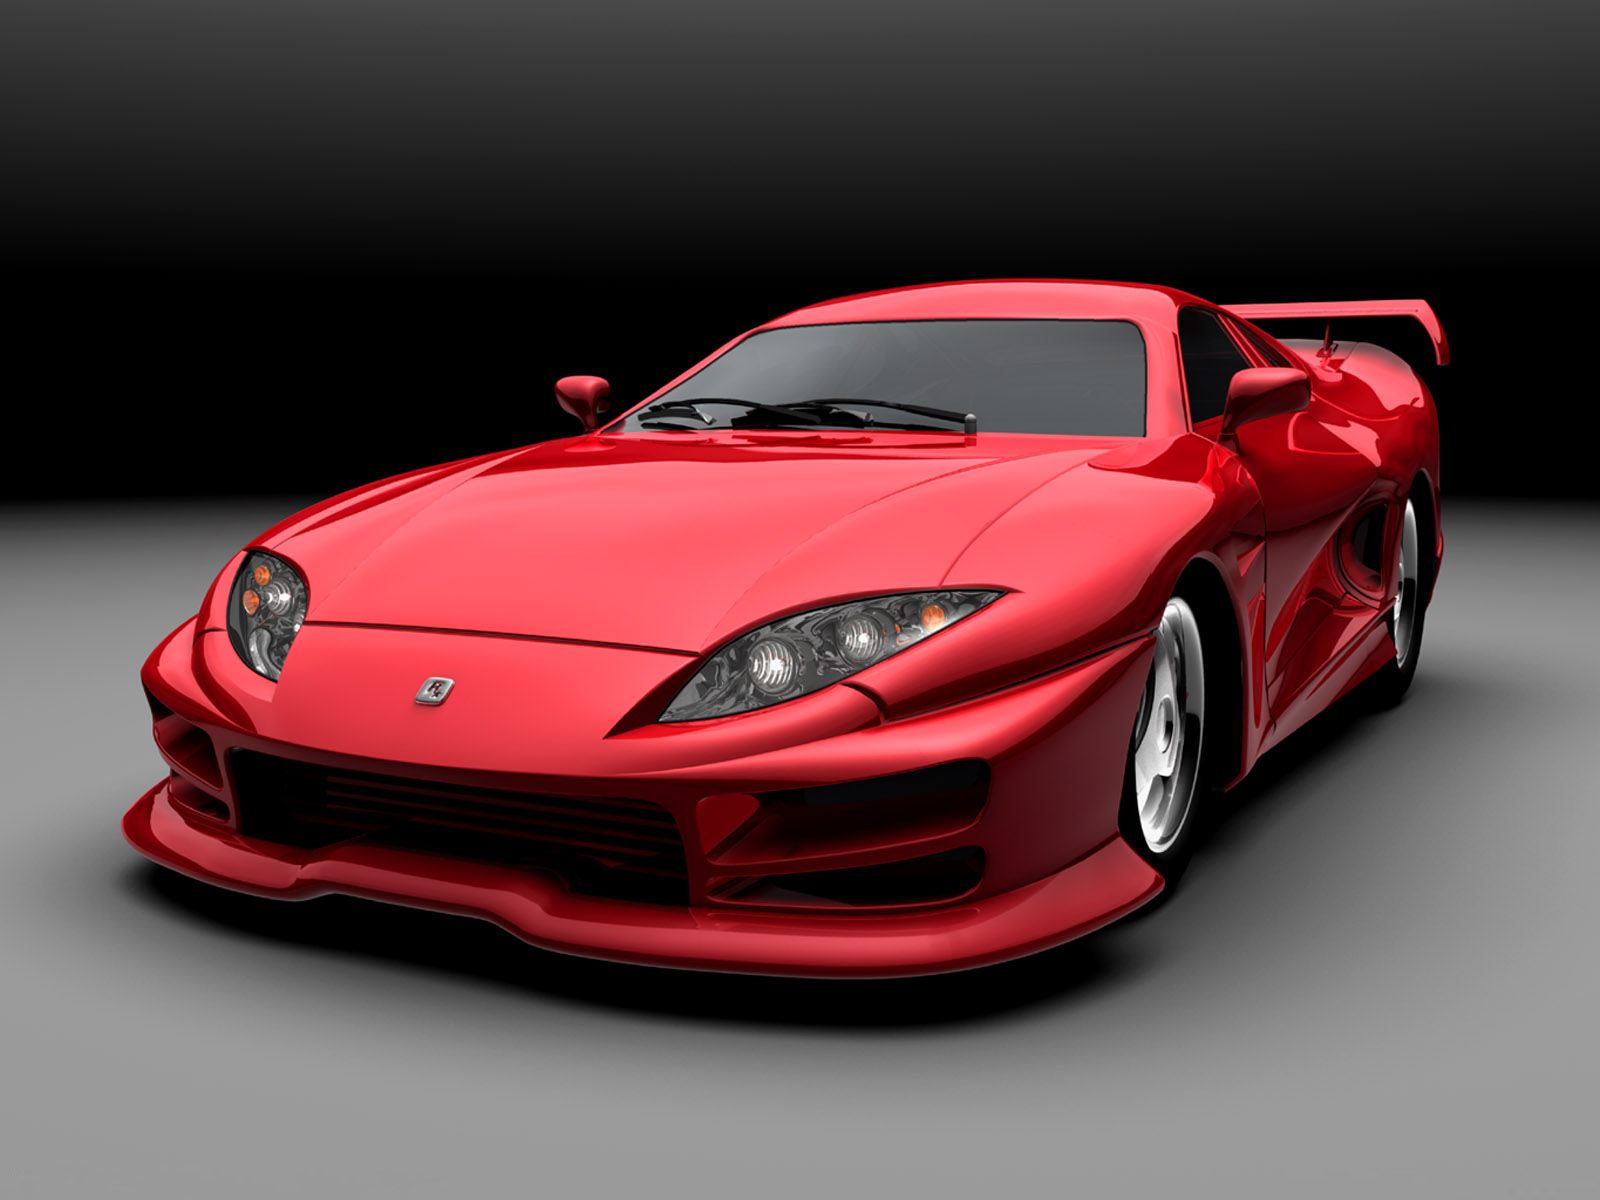 Modified Sports Cars Wallpaper Pictures Of HD